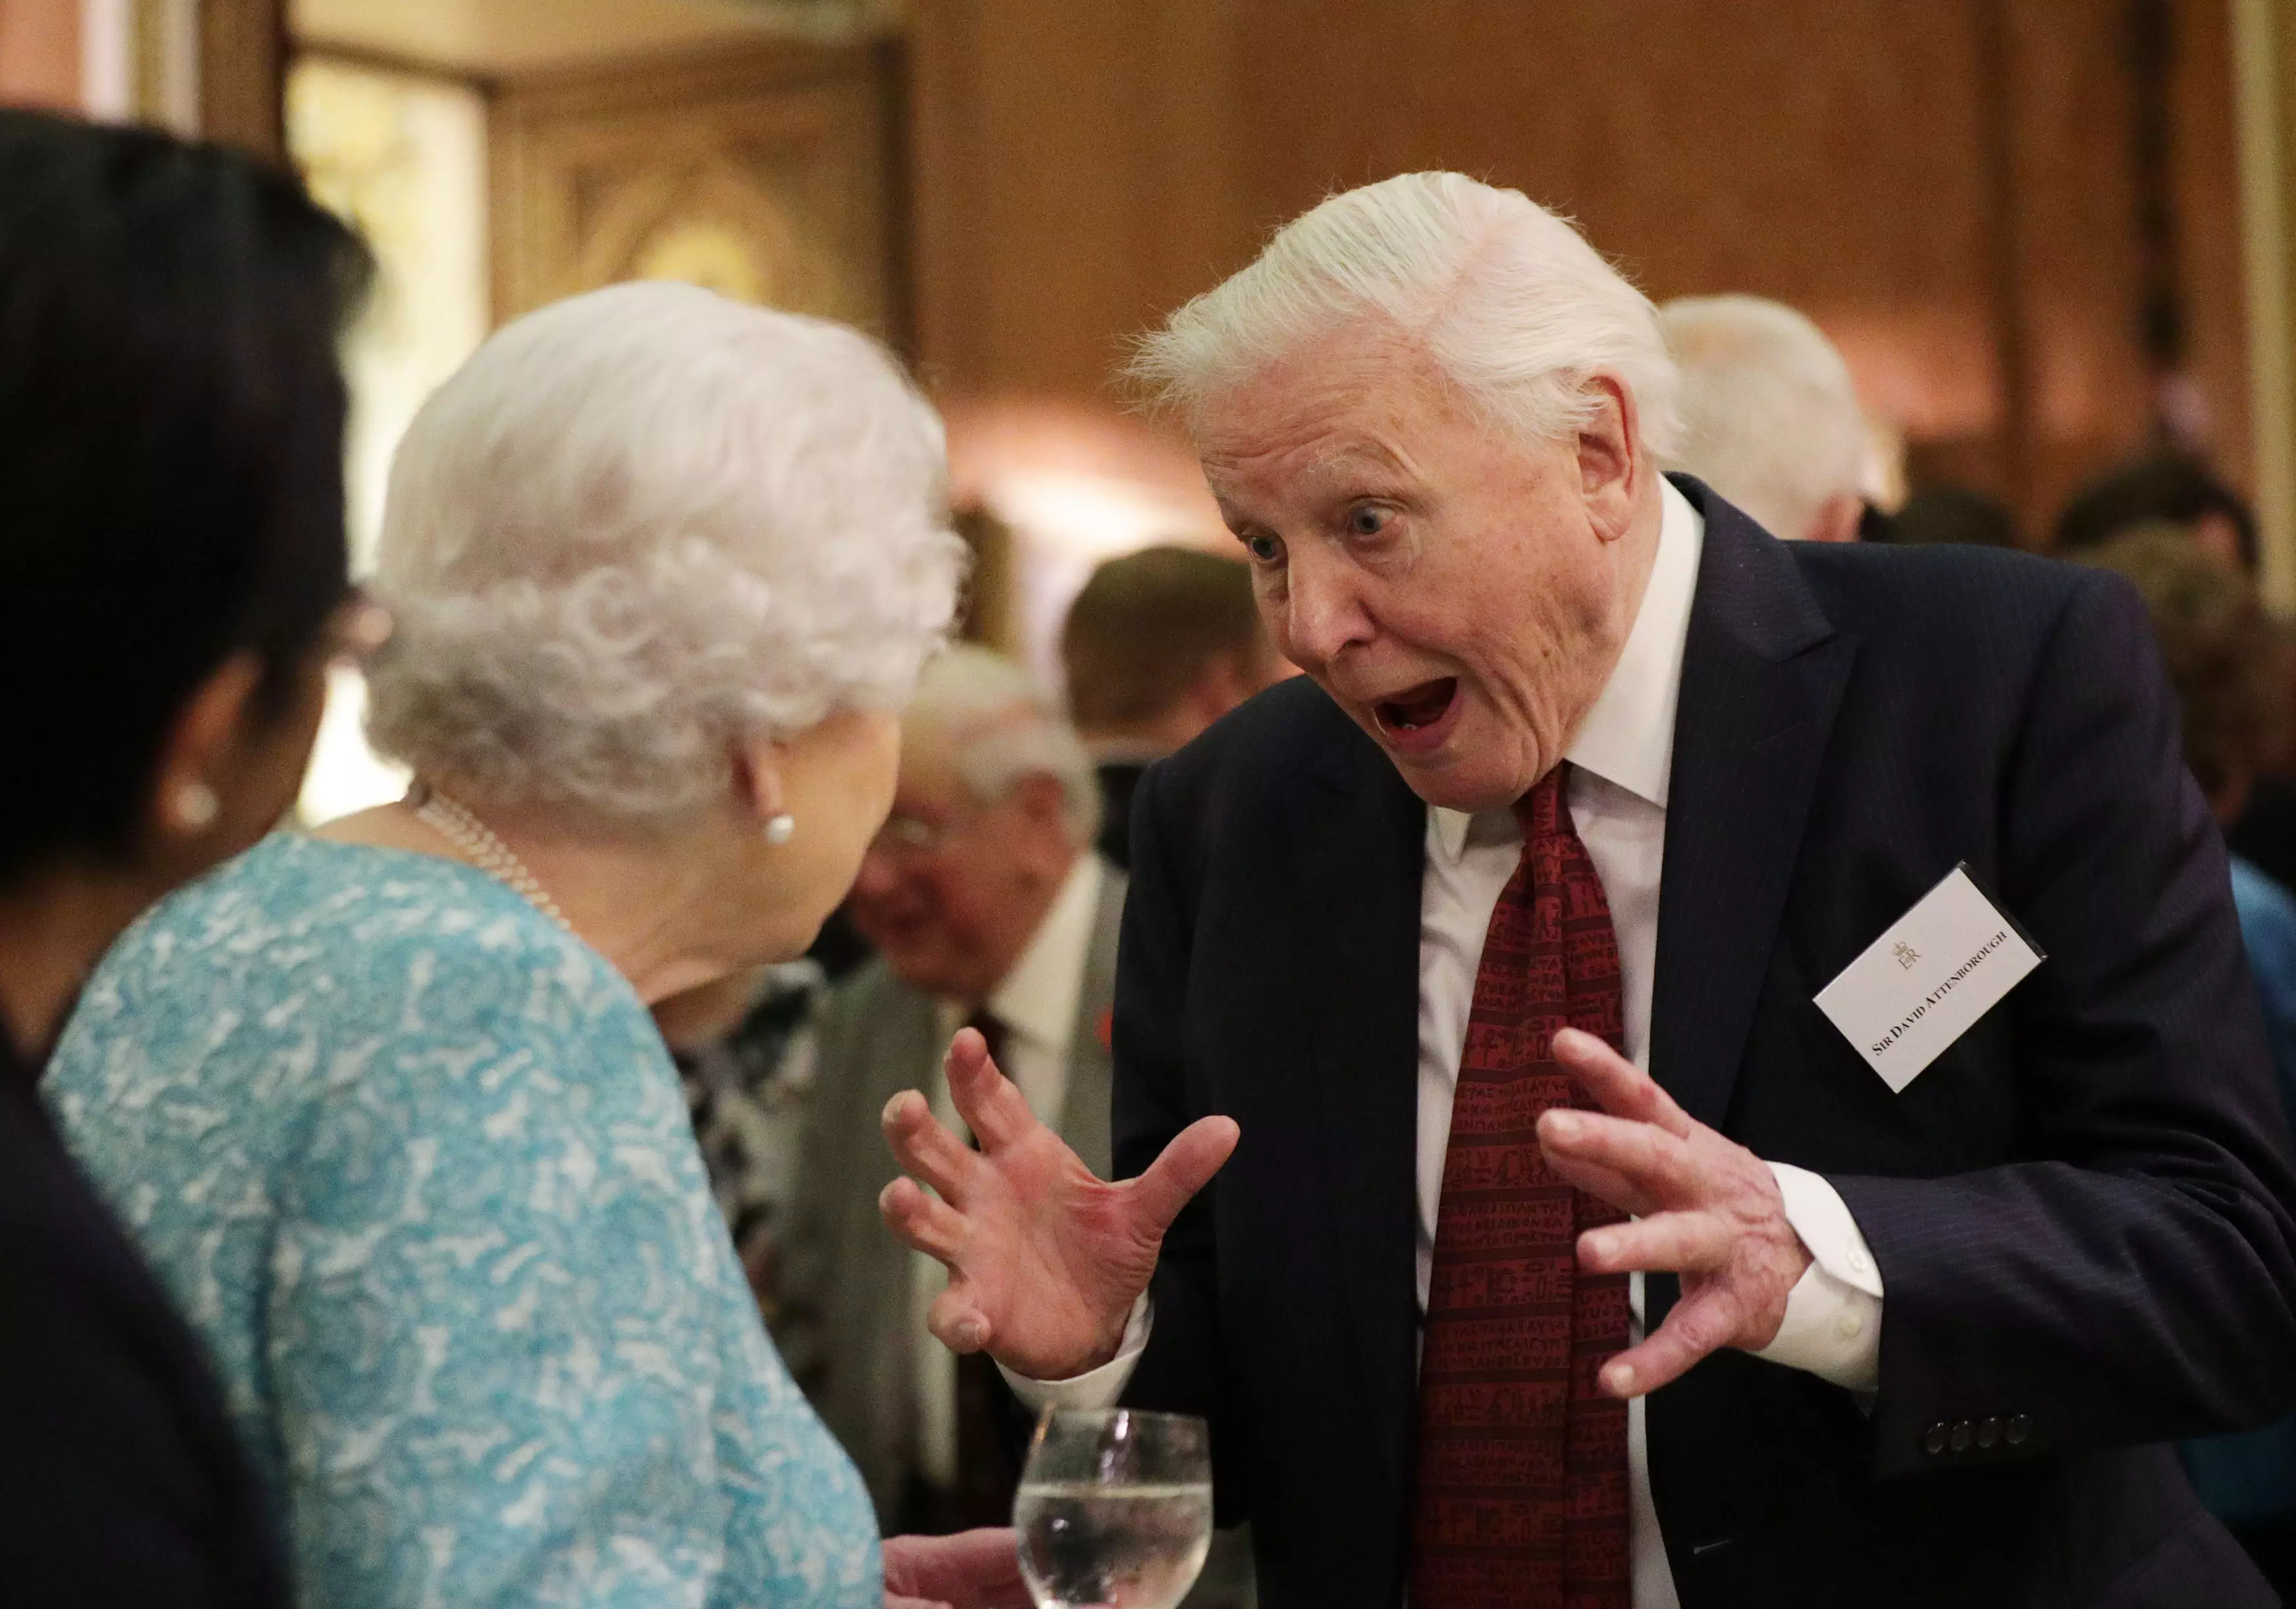 Sir David Attenborough Tries To Scare The Queen In Her Natural Habitat